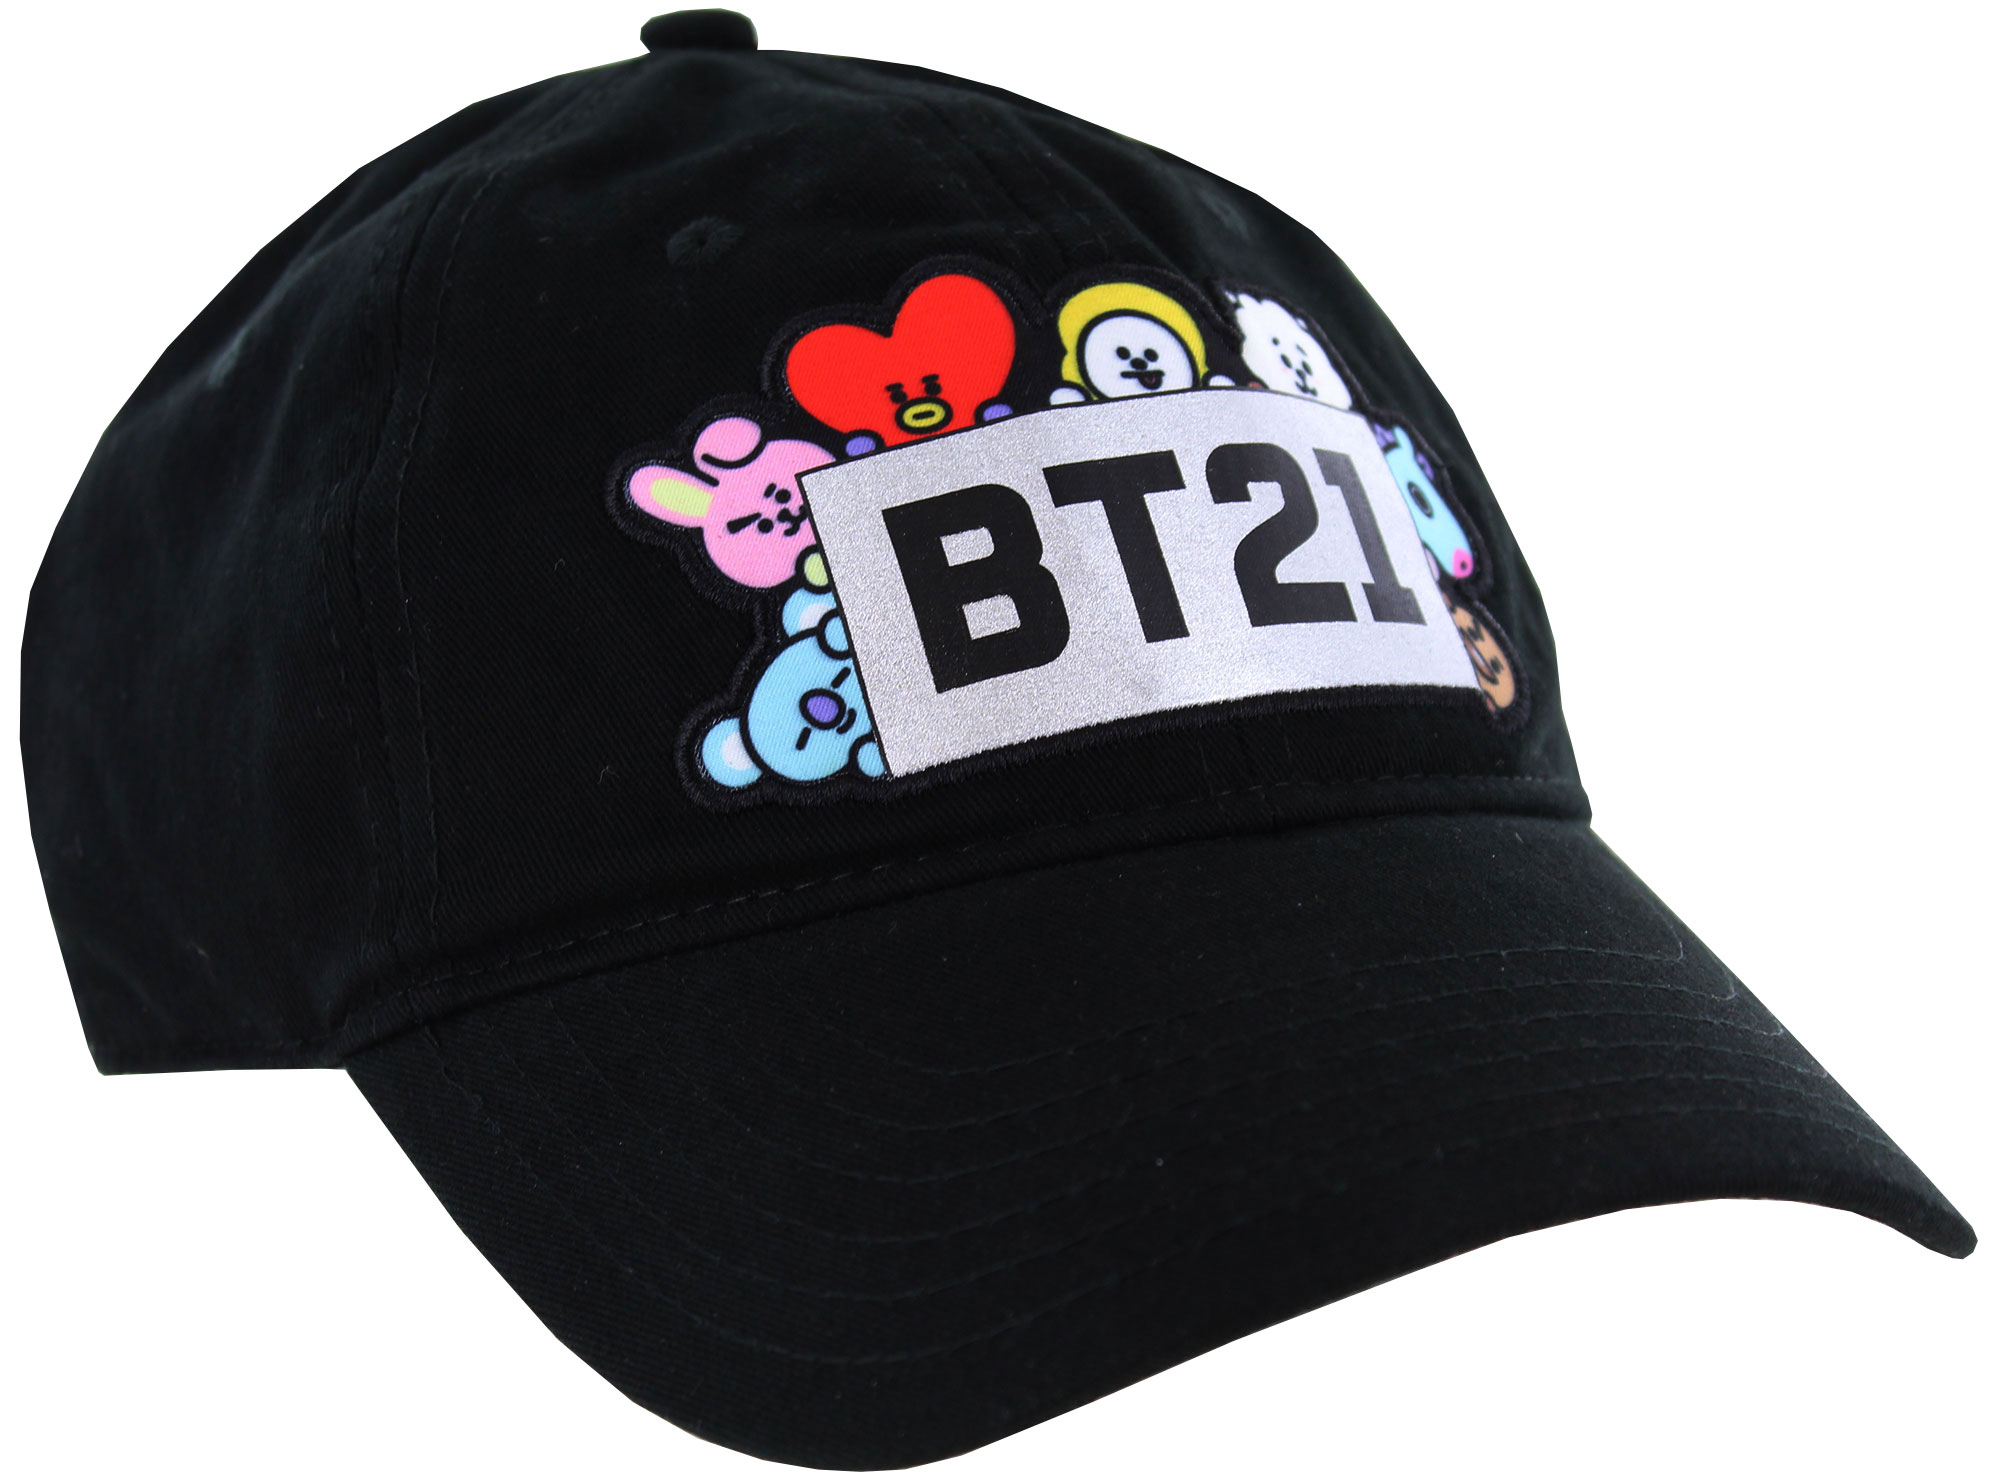 Concept One BT21 Group Embroidered Dad Cap